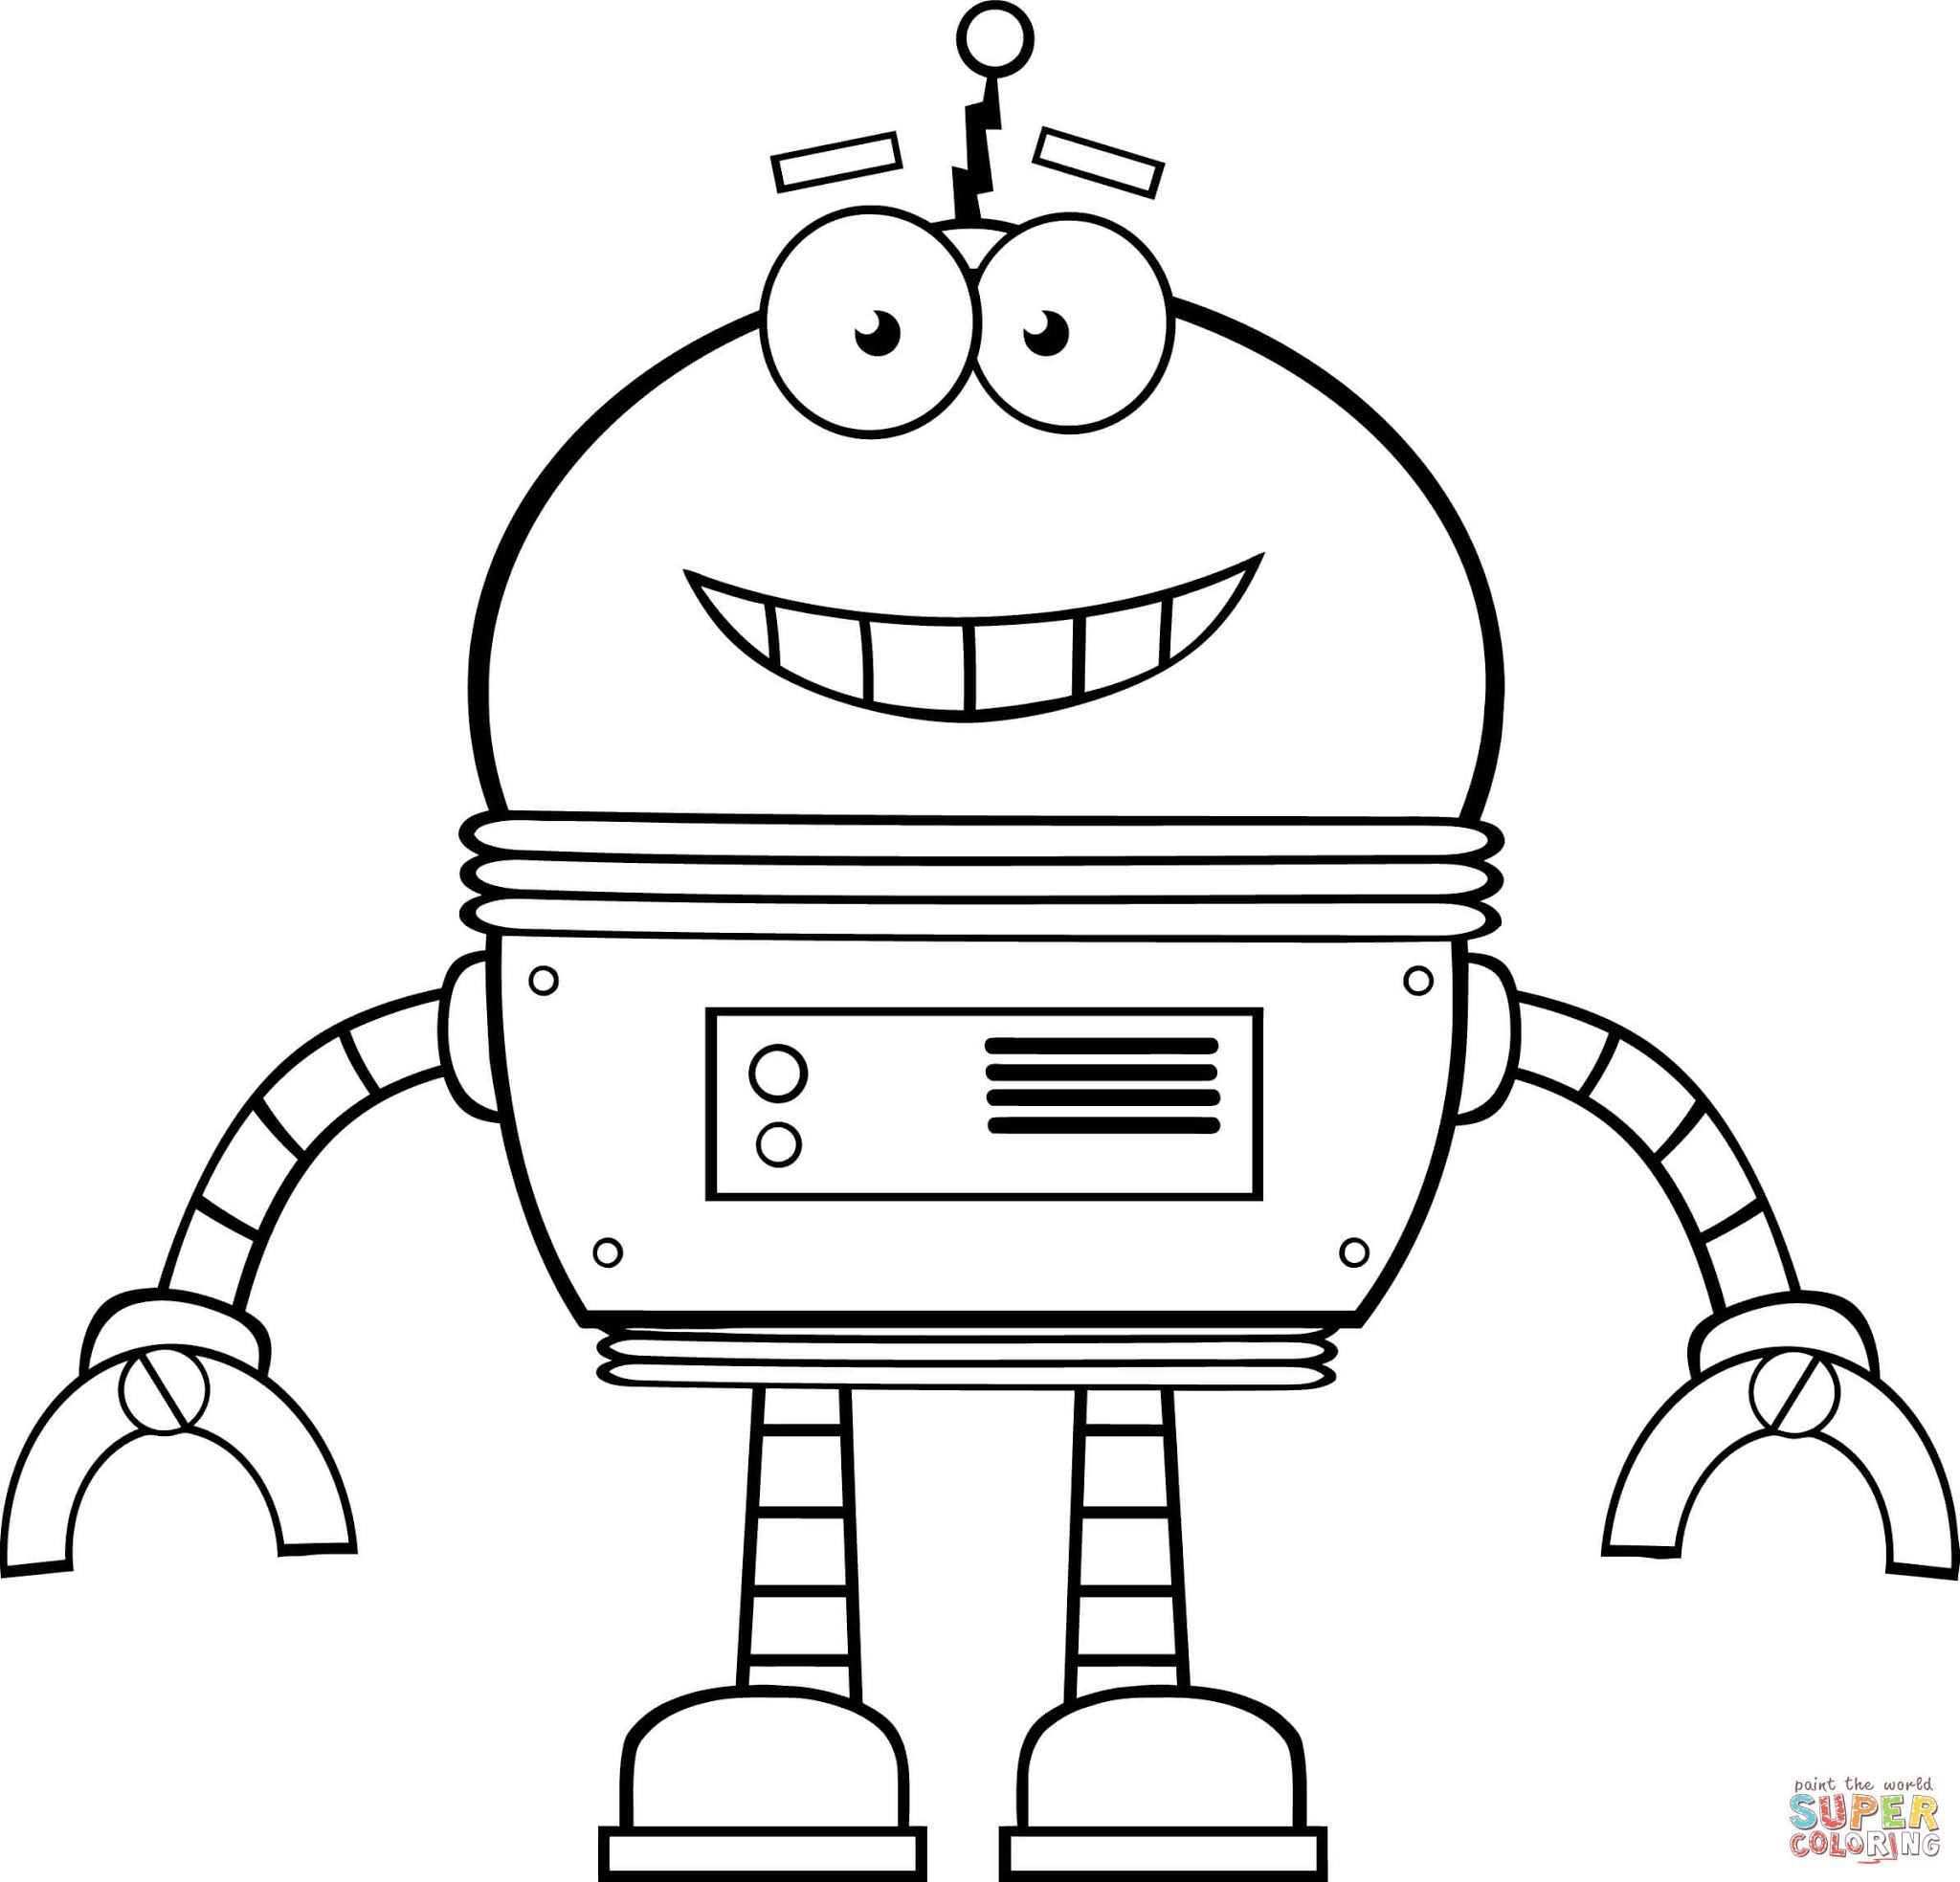 Smiling Robot Coloring Page Free Printable Coloring Pages Uitvindingen